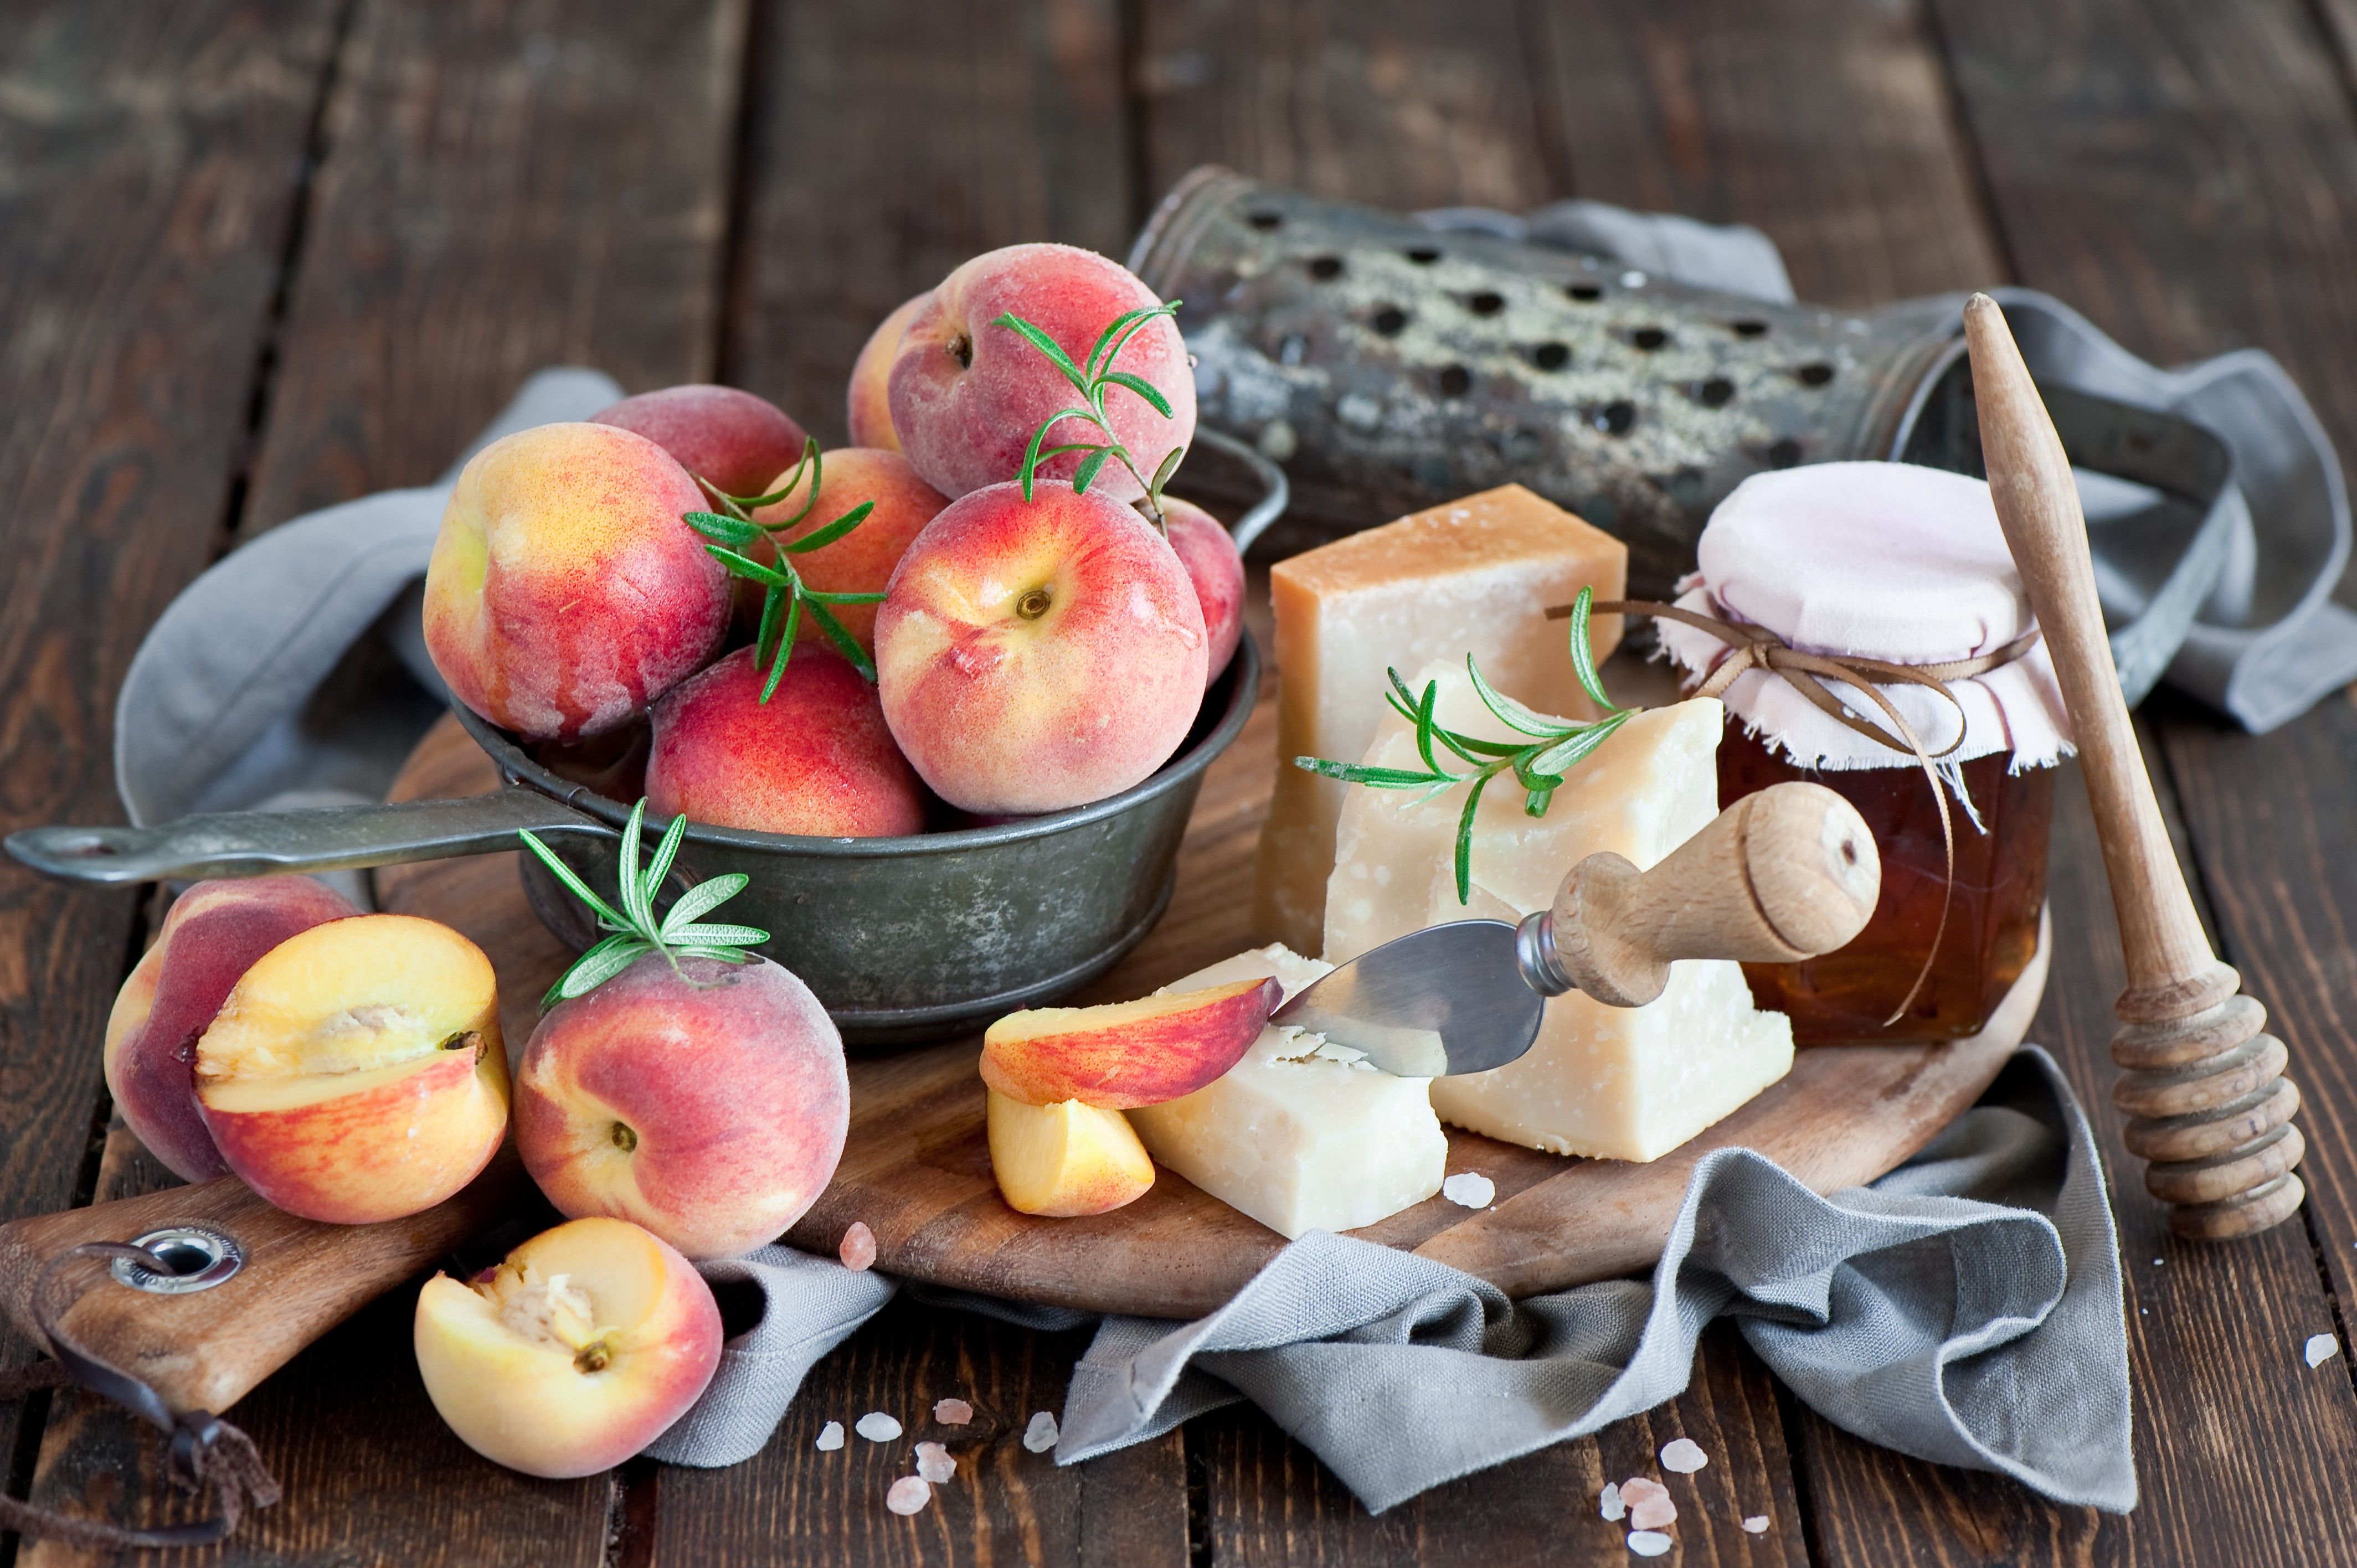 Wallpaper, food, wooden surface, cheese, fruit, honey, peaches, apple, meal, produce, land plant, flowering plant, rose family 4256x2832